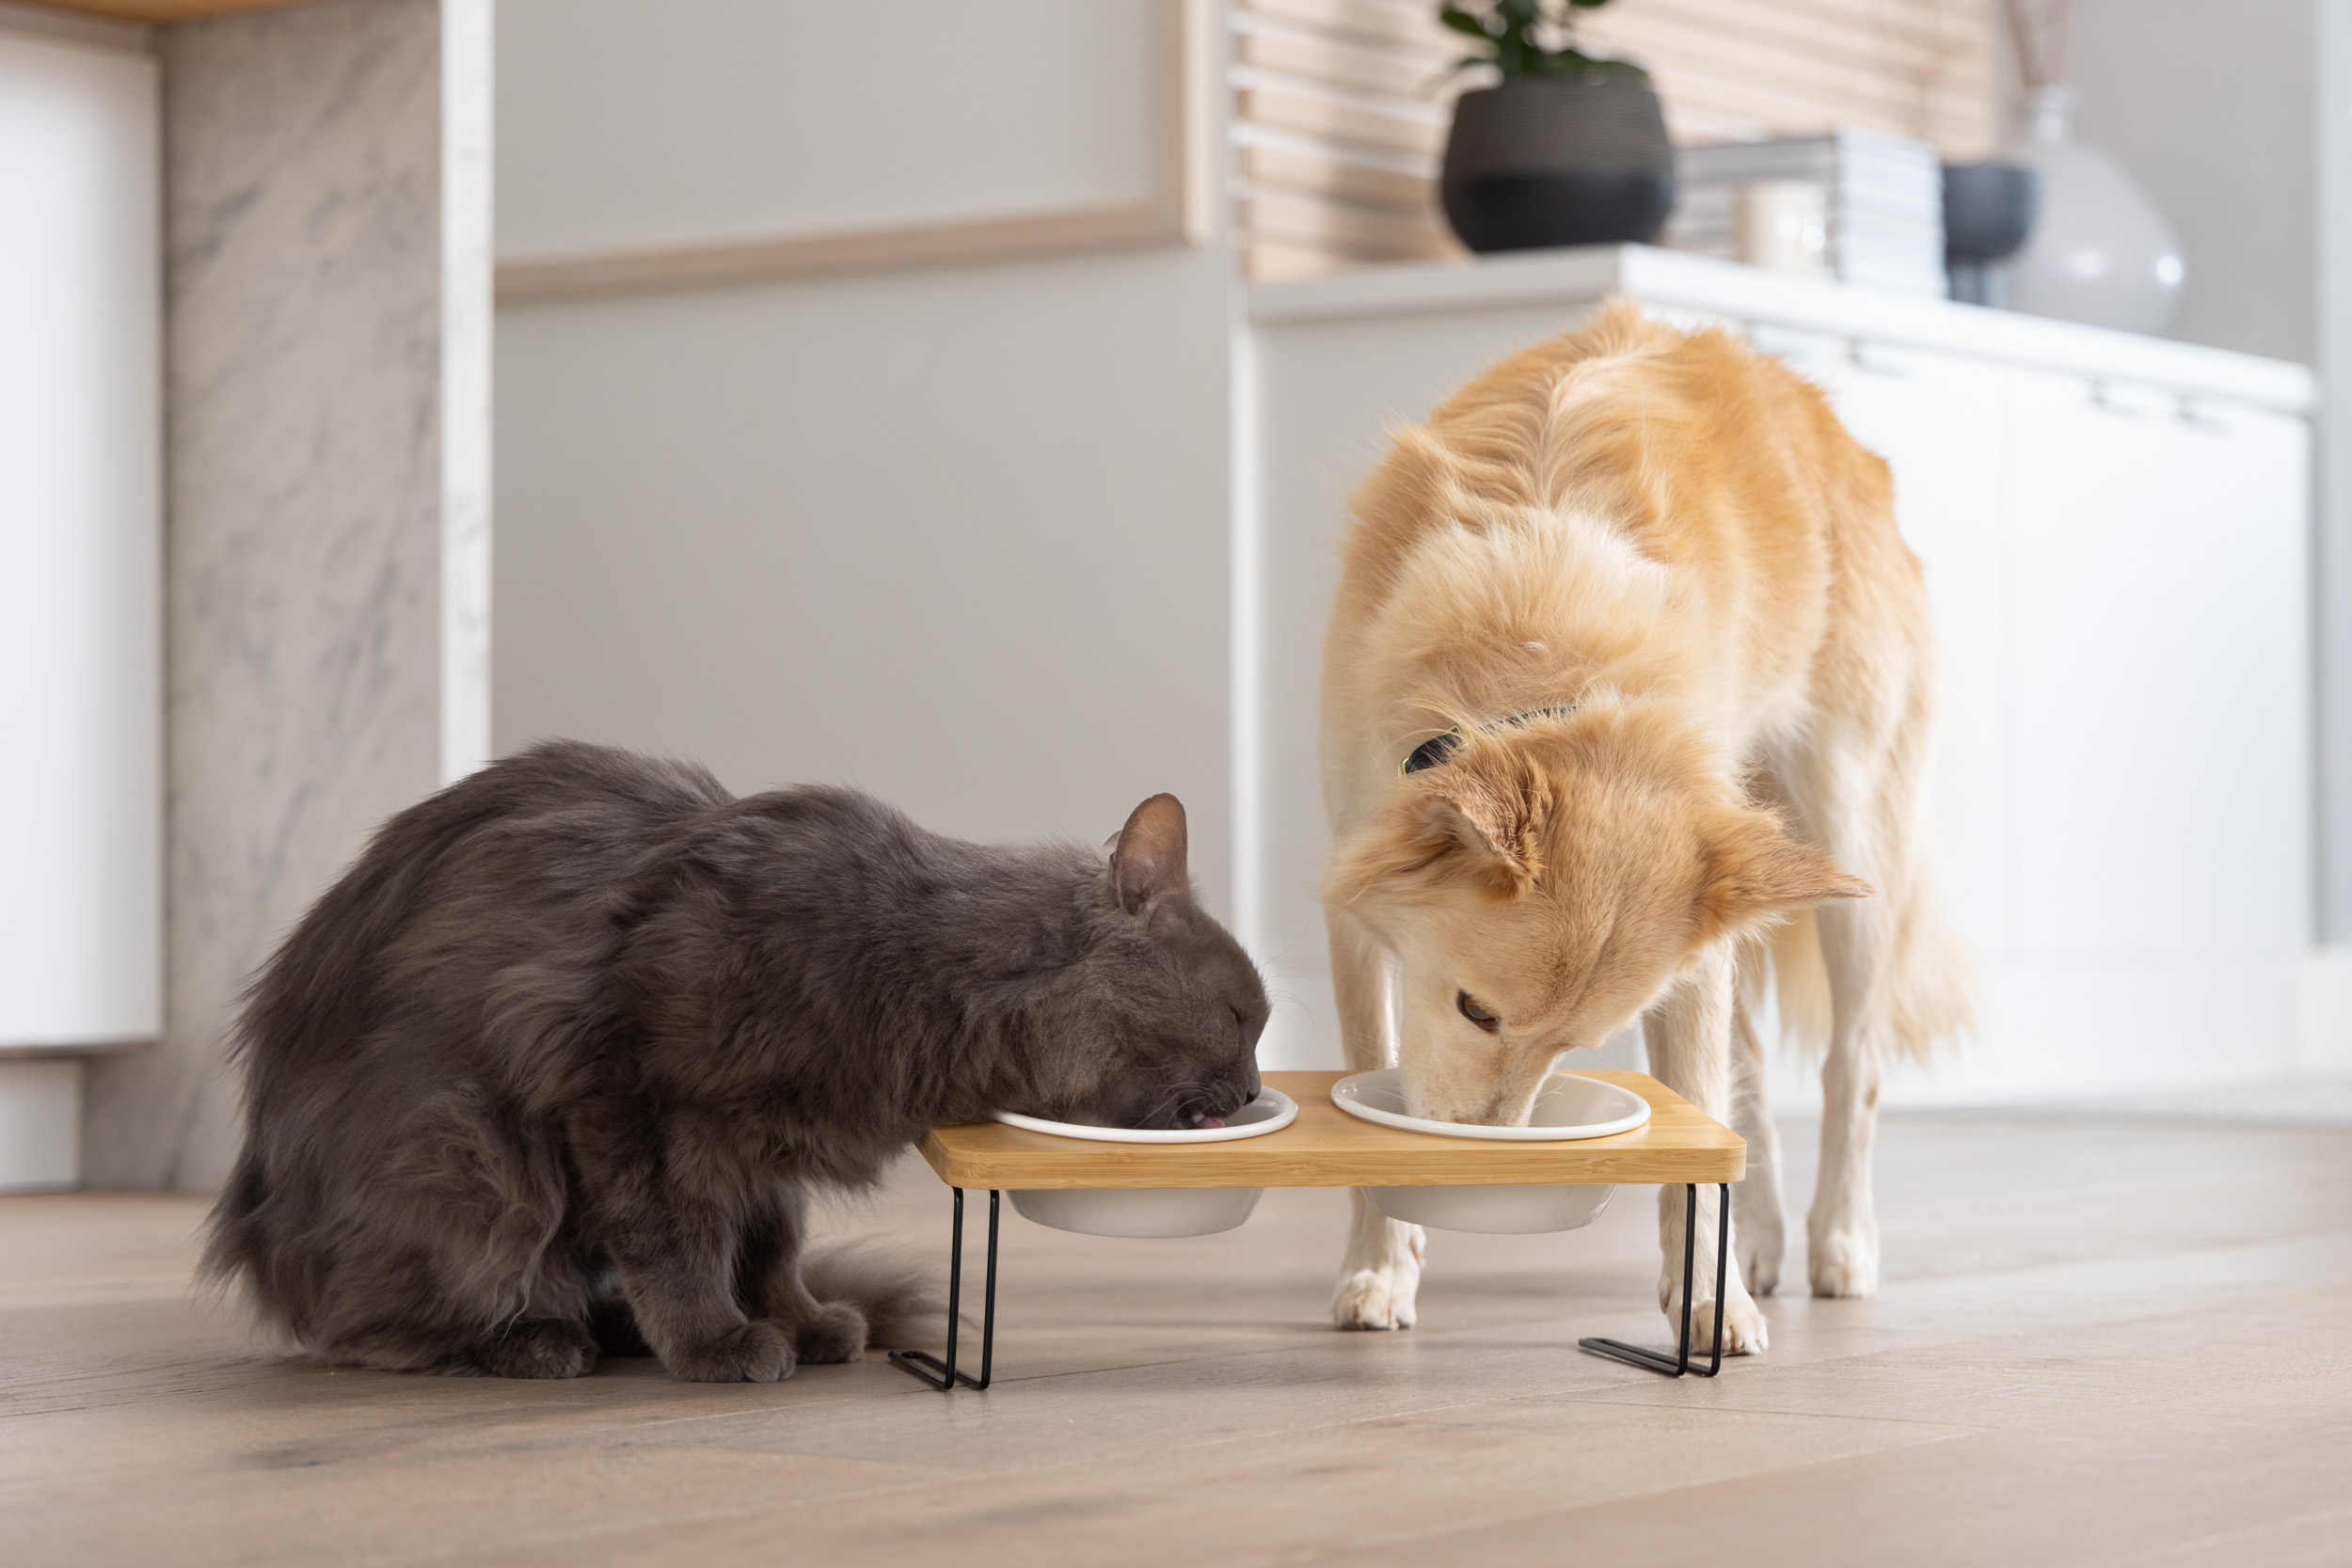 Pet Advertising Photography | Dog and Cat Eating Together by Mark Rogers